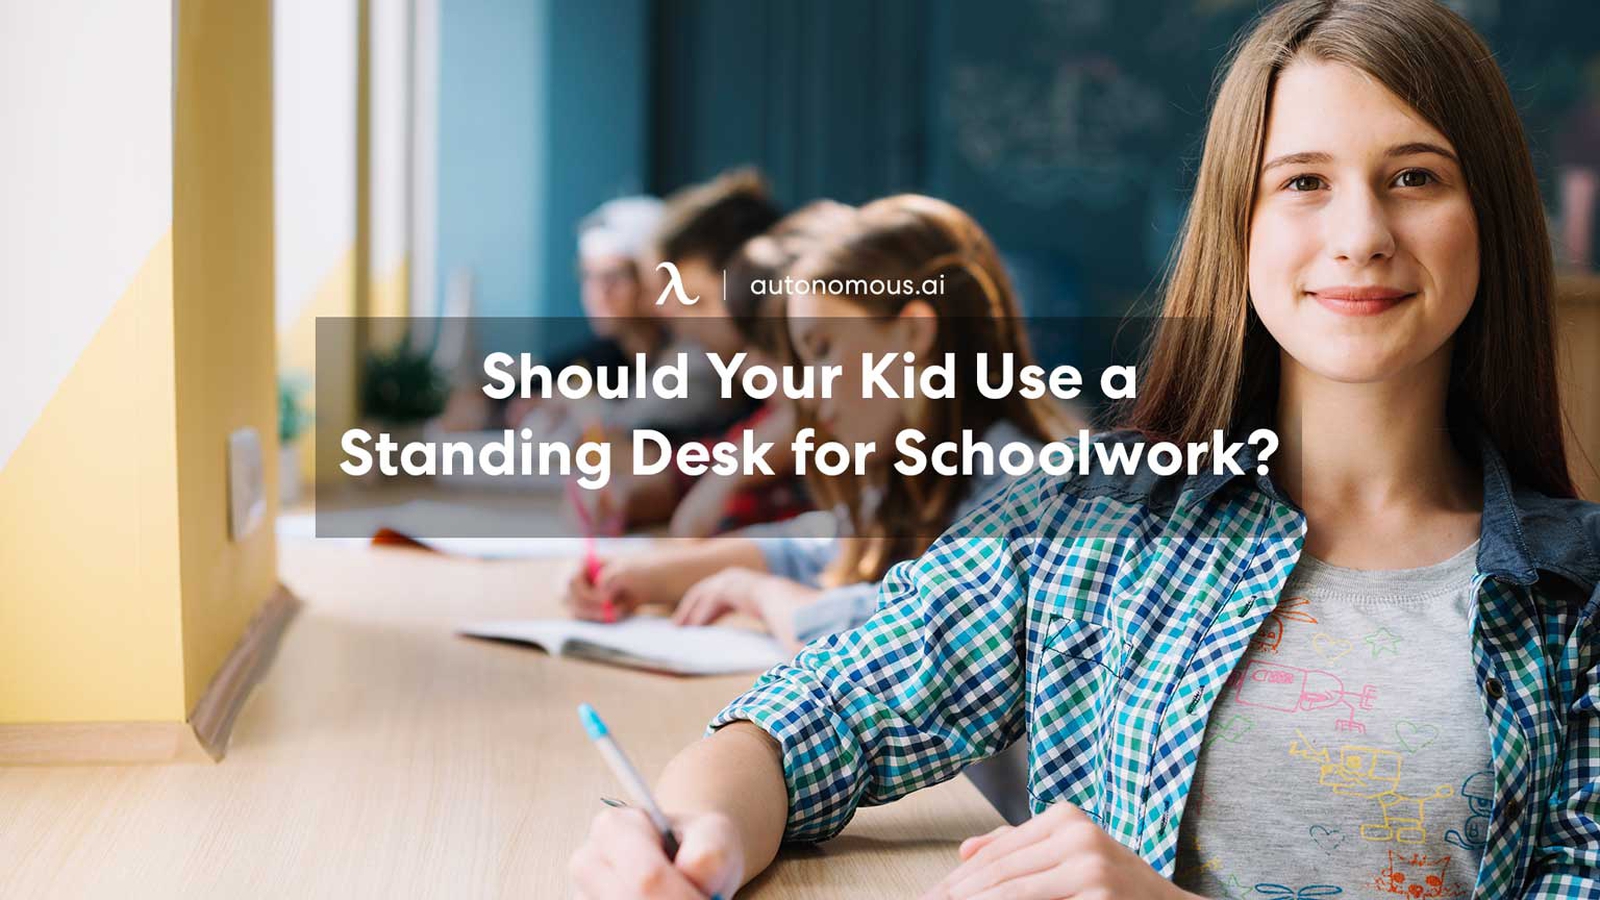 Should Your Kid Use a Standing Desk for Schoolwork?